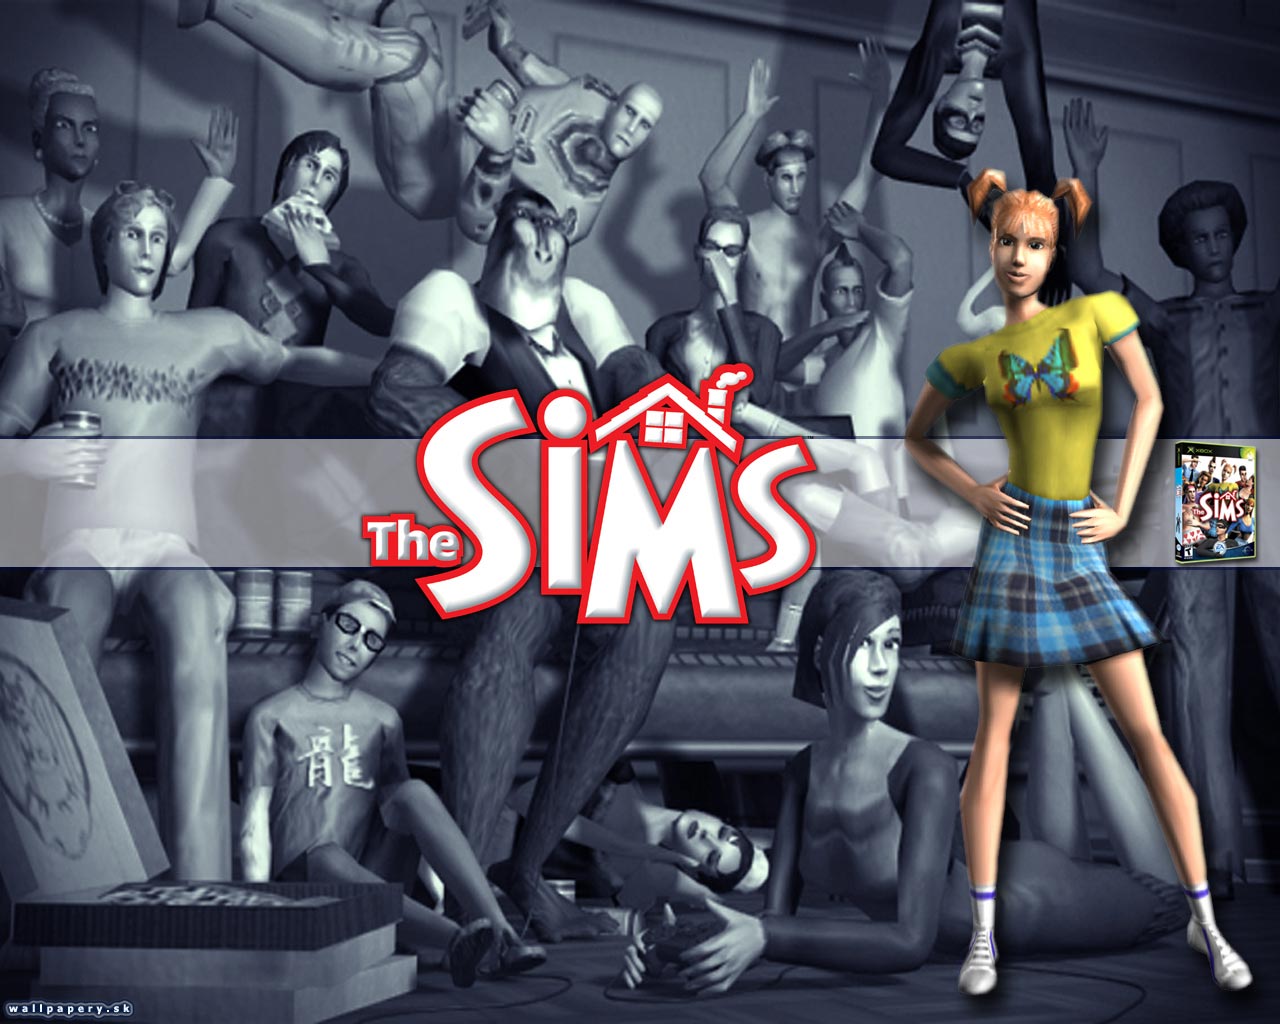 The Sims - wallpaper 3